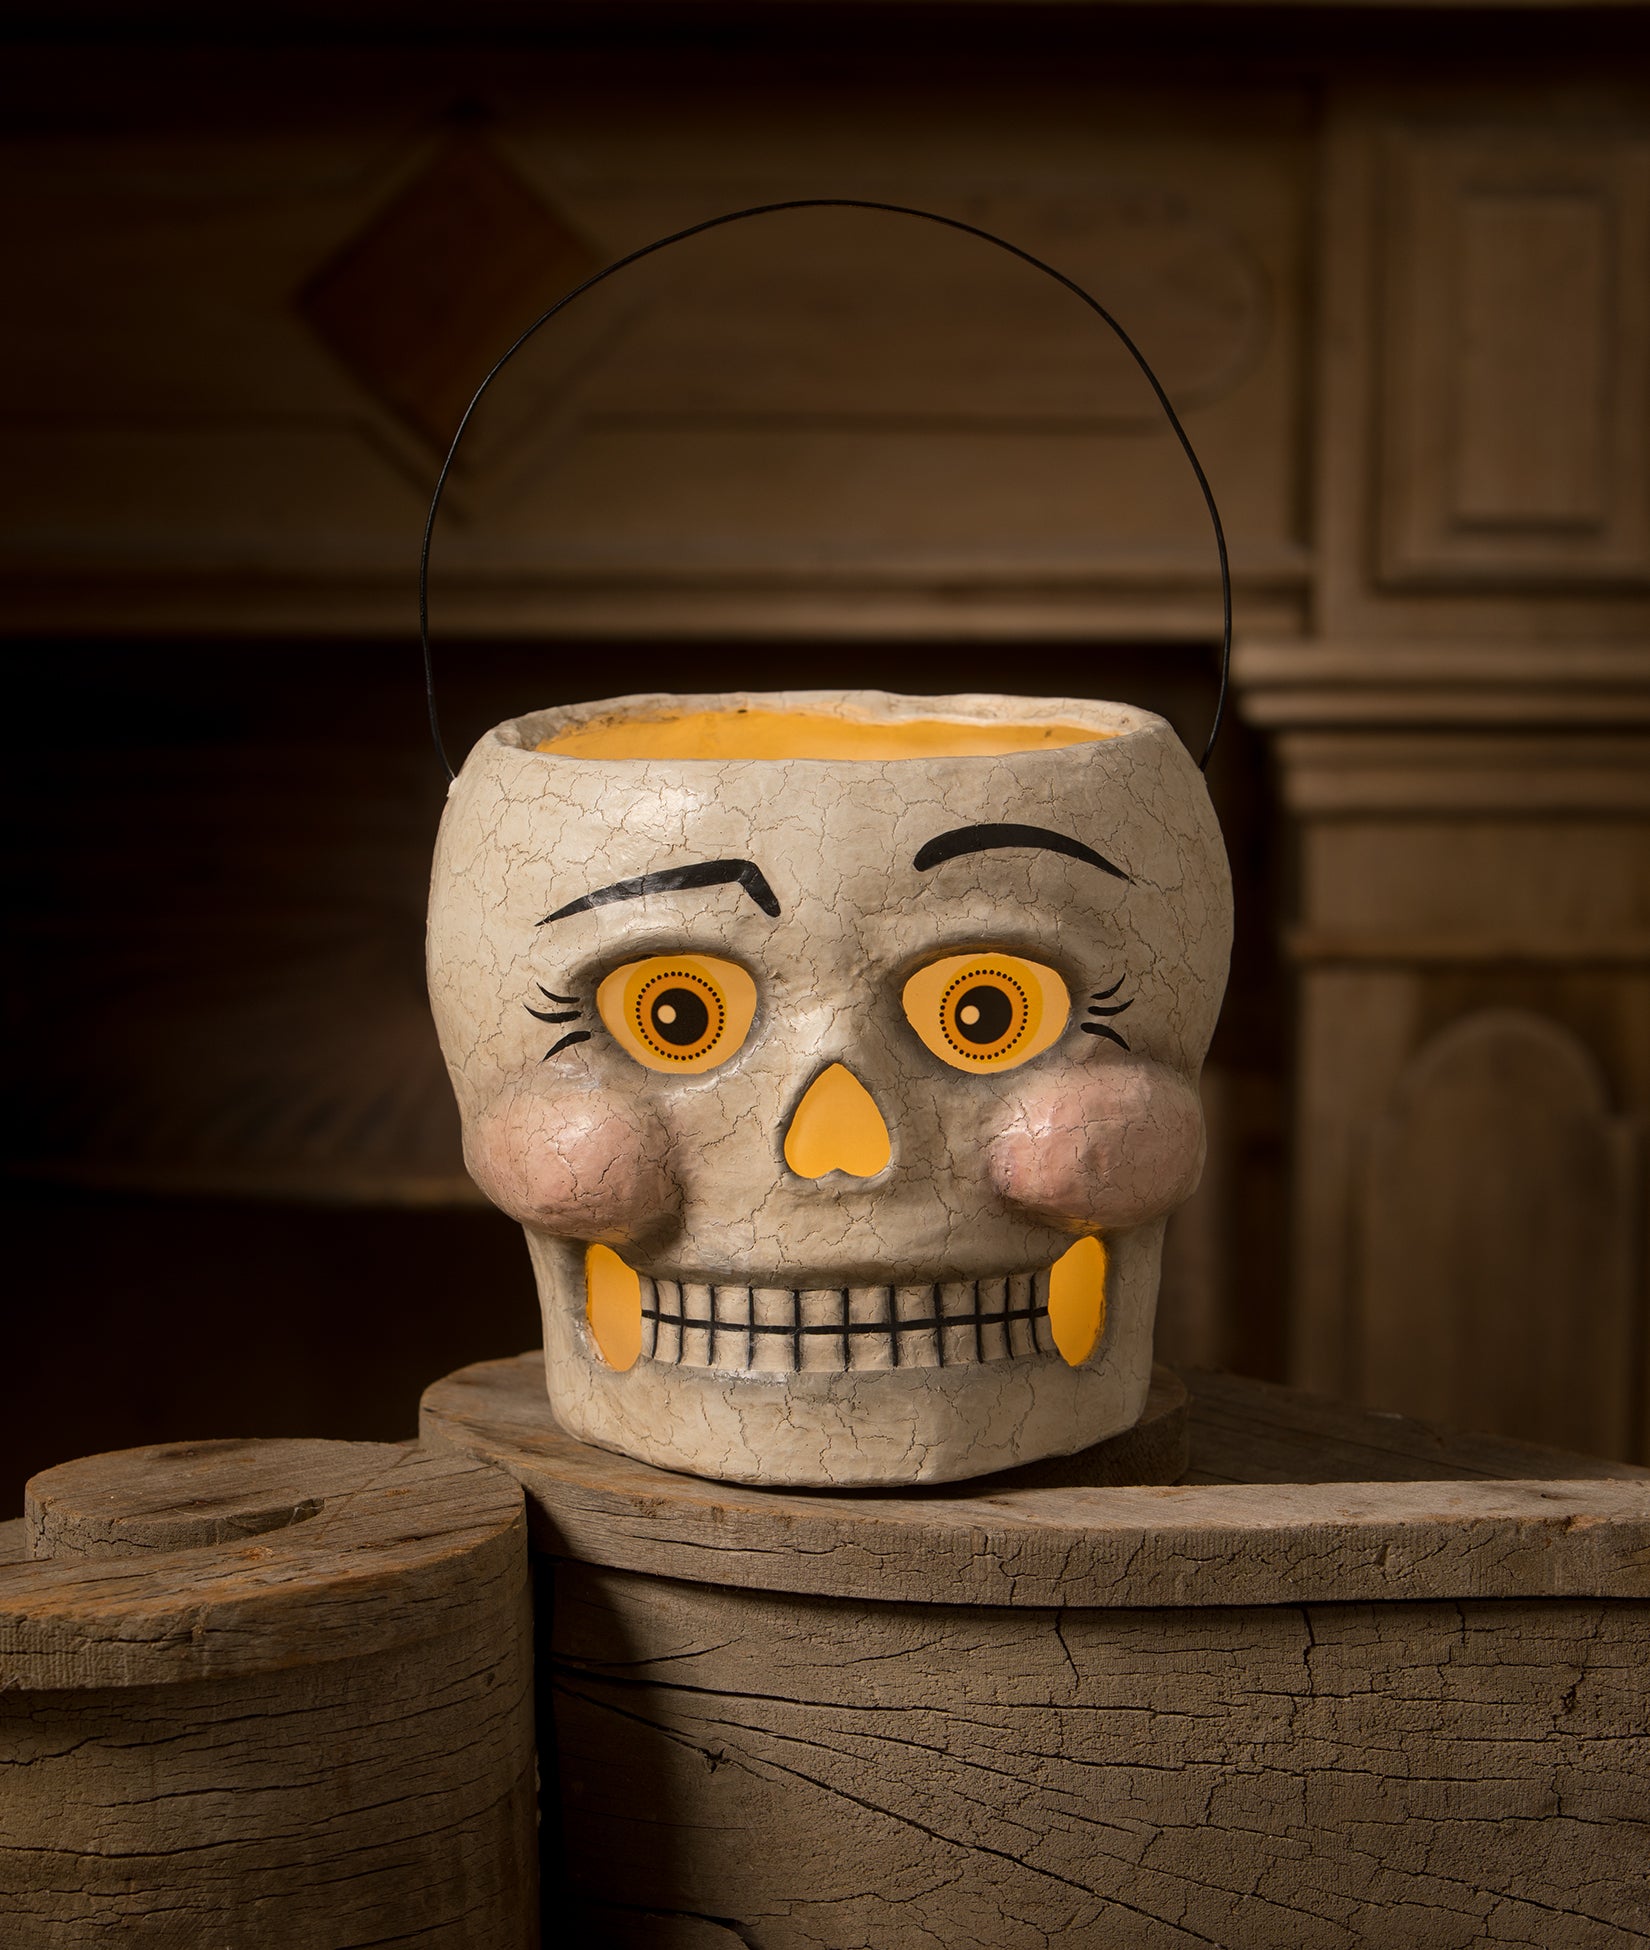 Silly Skelly Bucket, Paper Mache Halloween Decor by Bethany Lowe